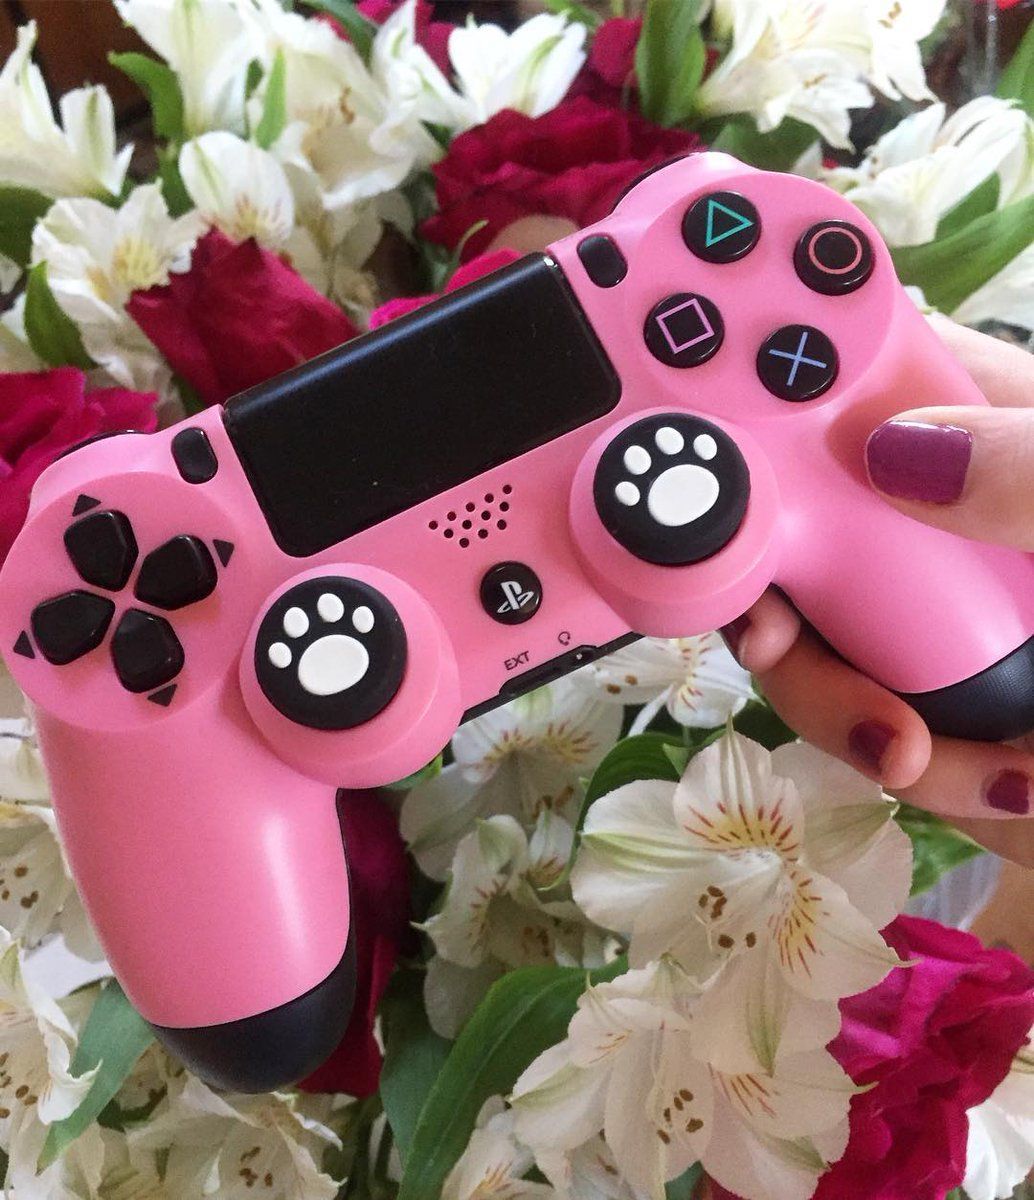 girl gamer pink ps4 controller: I hope you have a fun and stress